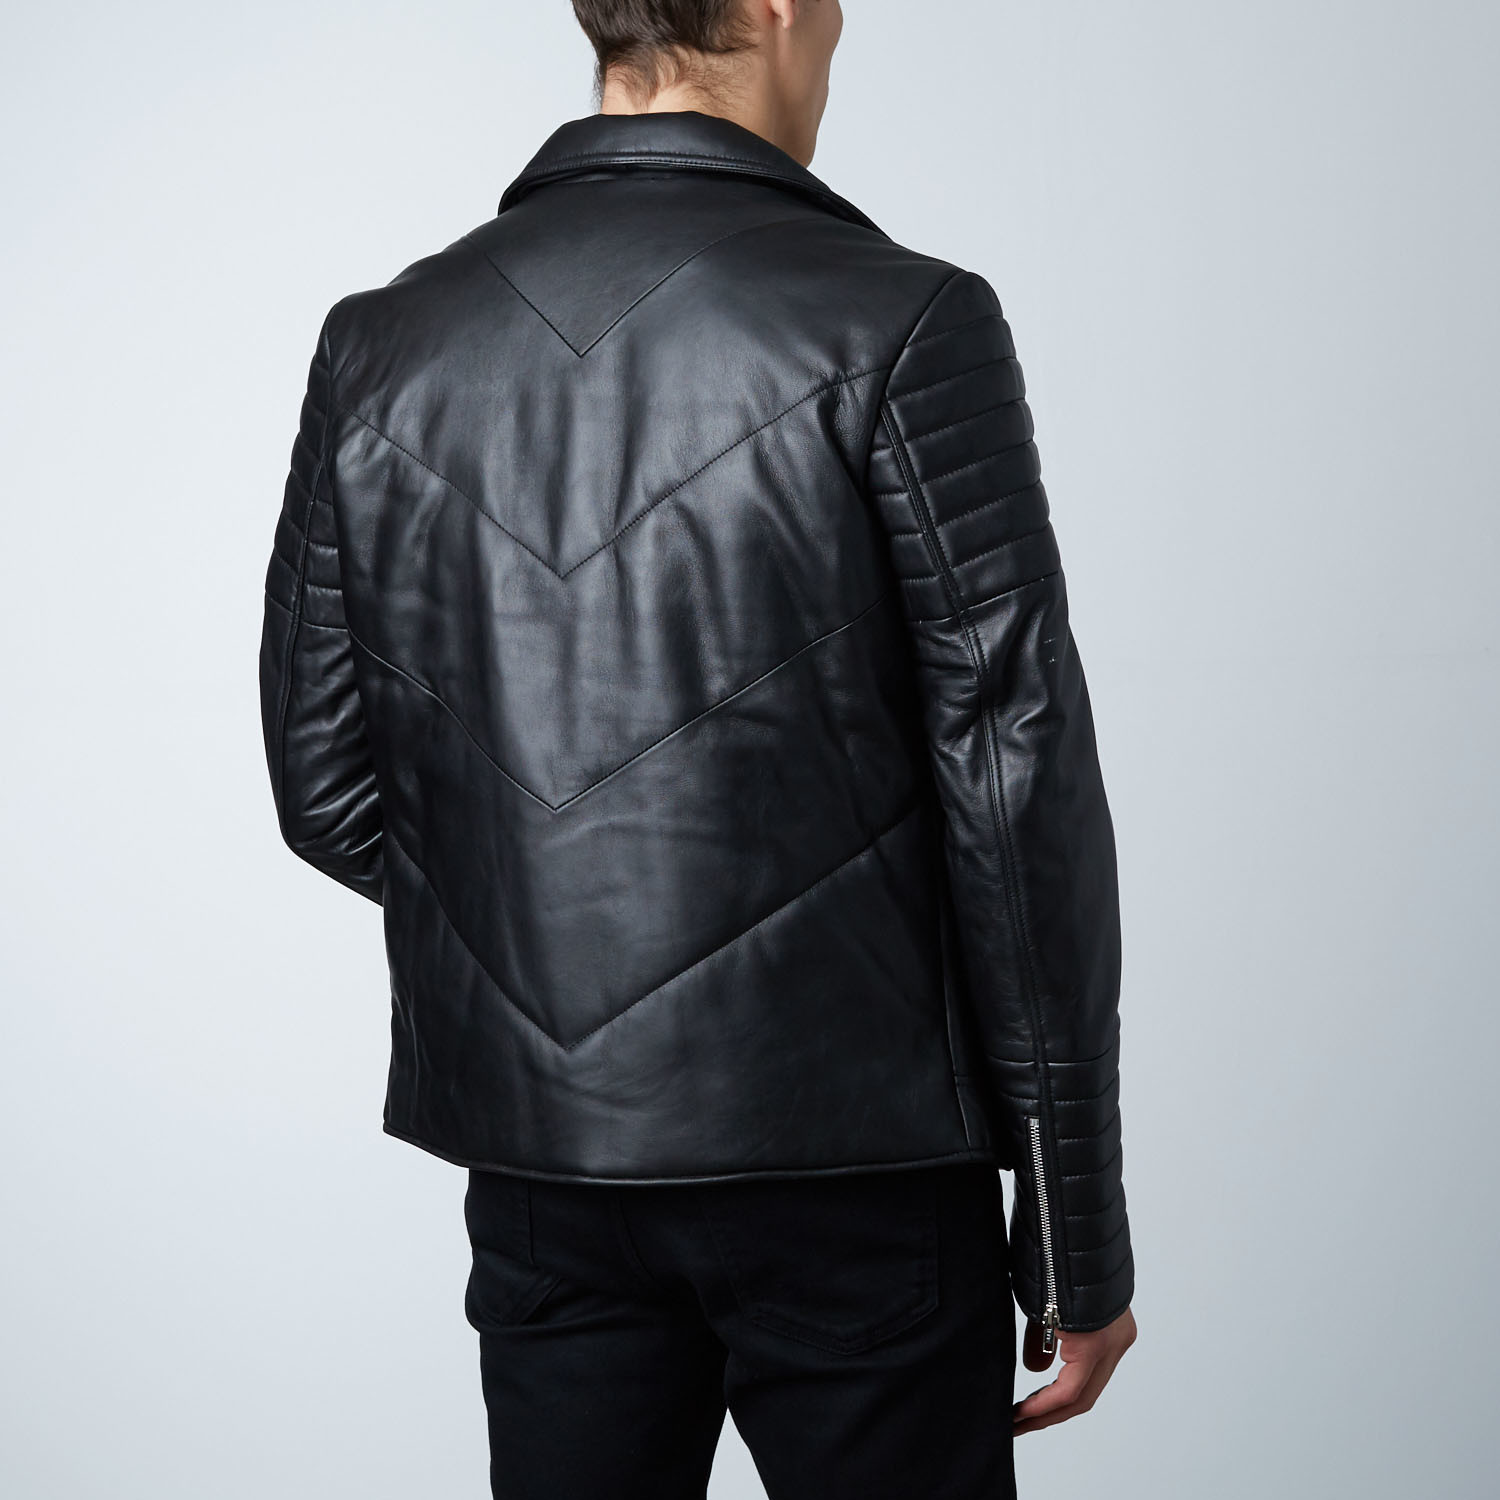 Mason + Cooper Ethan Leather Jacket // Black (S) - Wilda - Touch of Modern